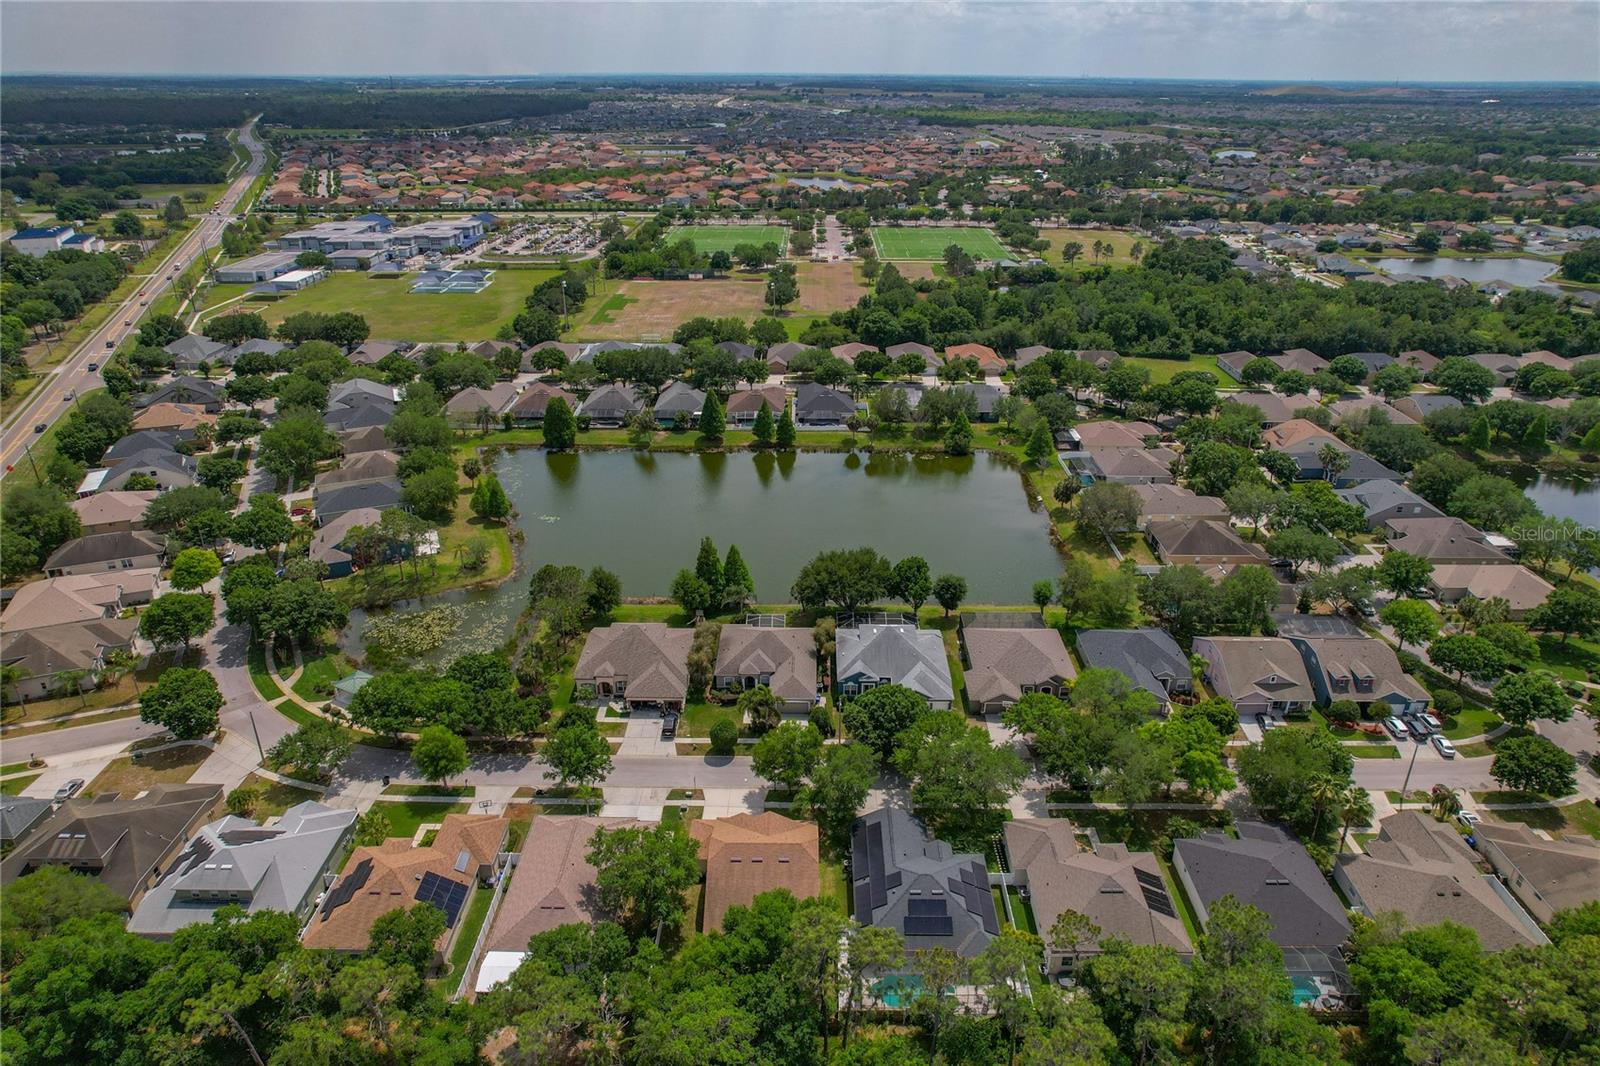 View of Neighborhood with 12814 Cattail Shore Lane at bottom center of frame